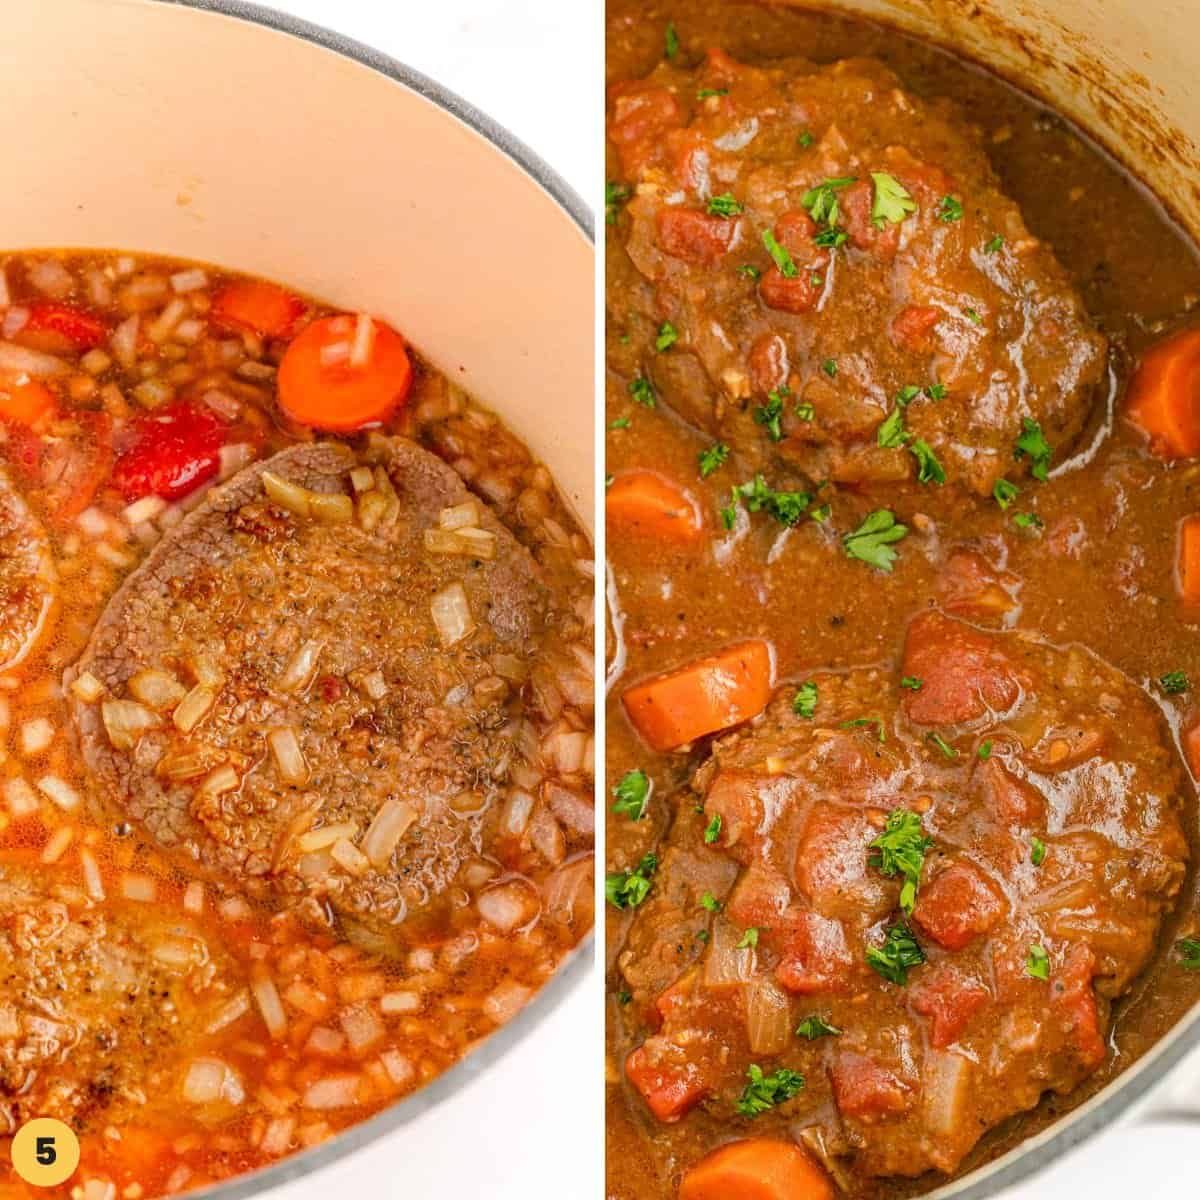 Collage of 2 images showing the braised swiss steak before braising and after braising